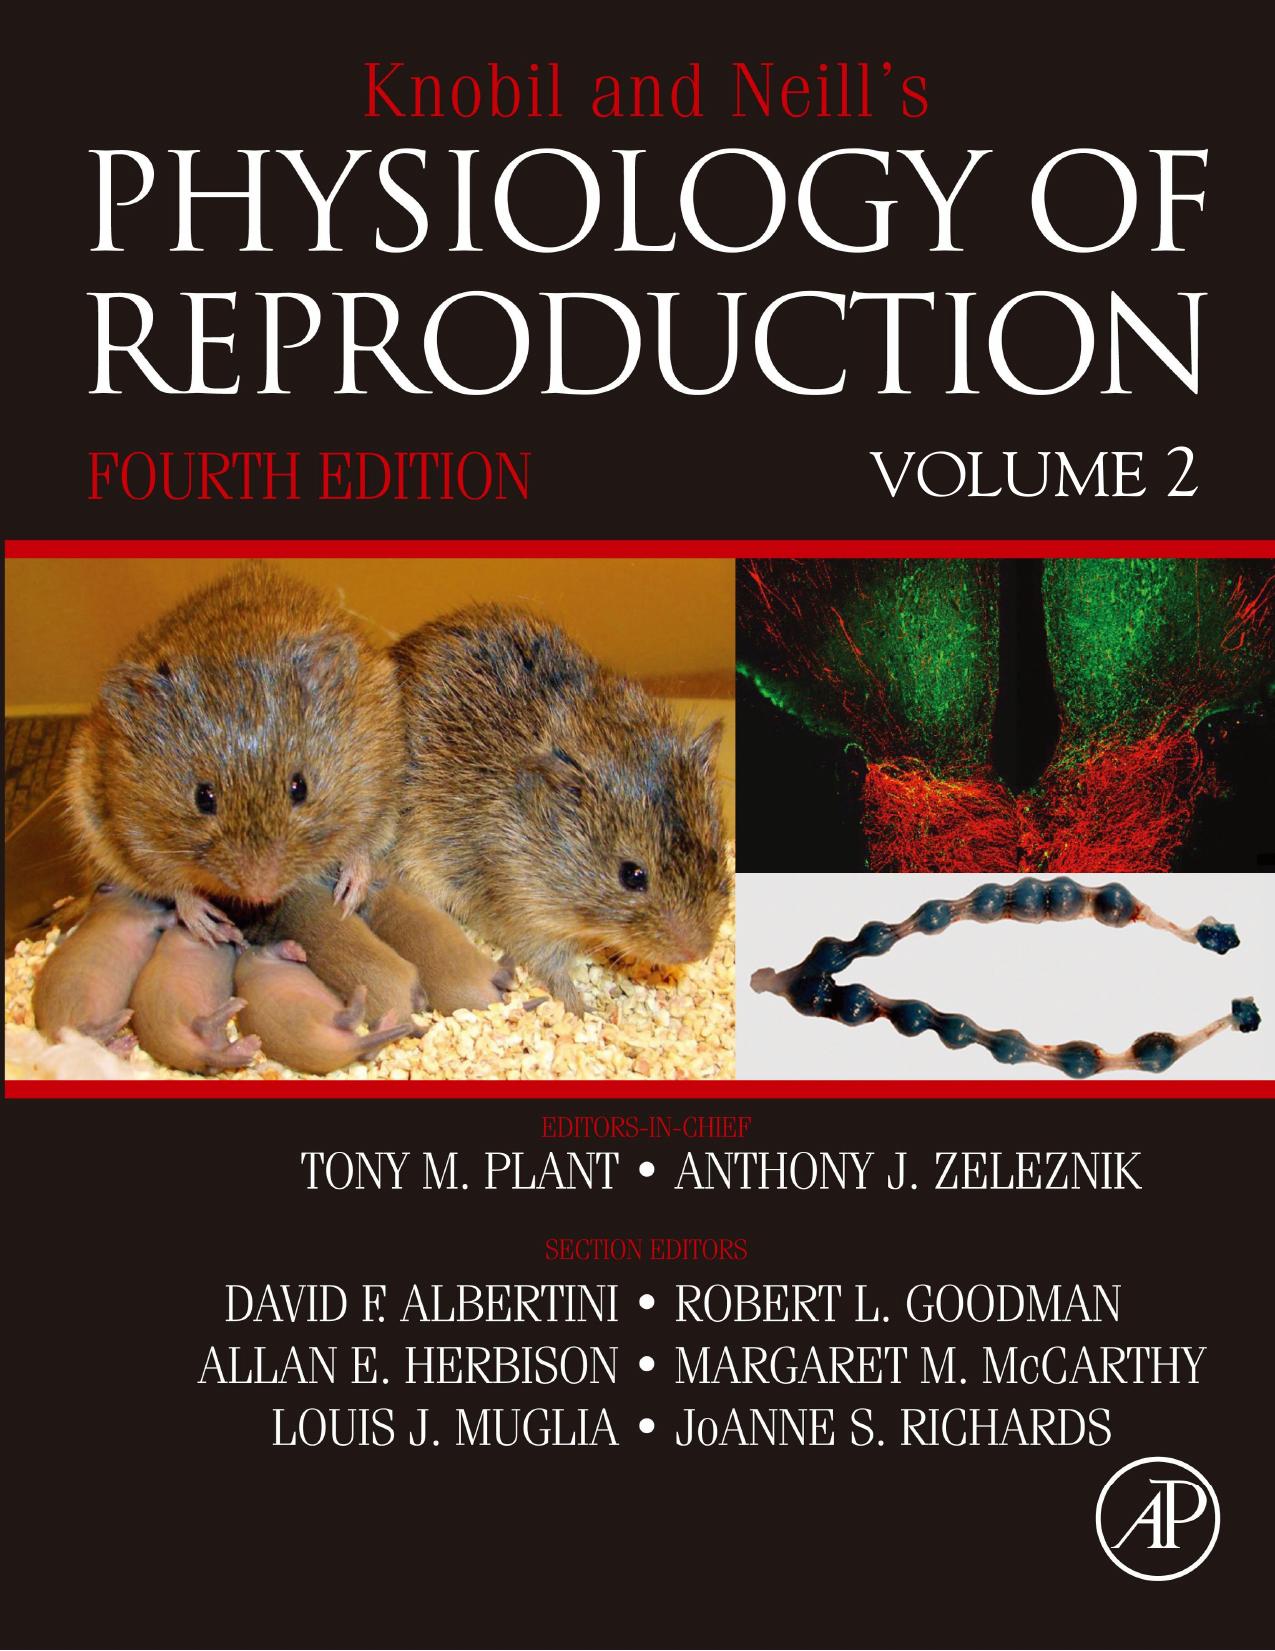 Knobil and Neill's Physiology of Reproduction, Fourth Edition - Volume 2